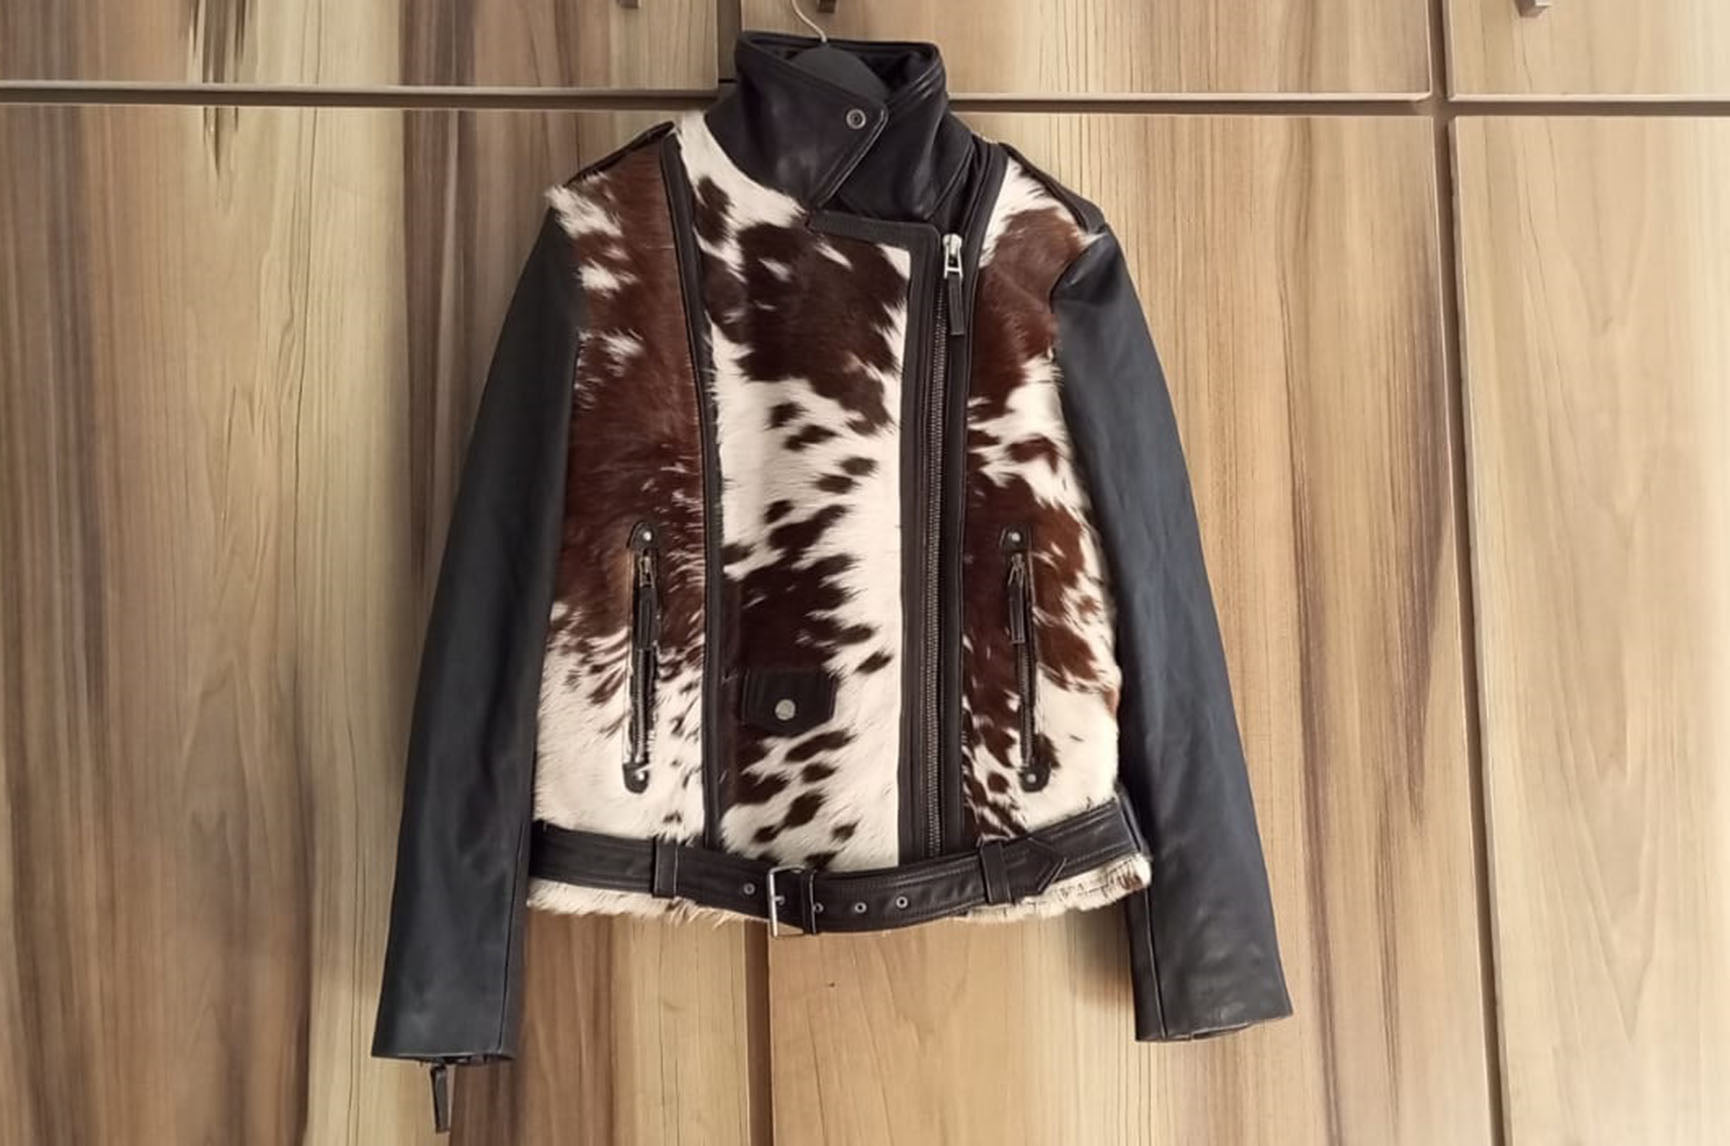 winter jacket women cowhide leather jacket women motorcycle jacket women brown jacket ladies leather jacket genuine leather jacket handmade gift for her winter jackets for women pullover collar jacket women high collar jacket women biker leather jacket women brown leather jacket for women tri colour jacket